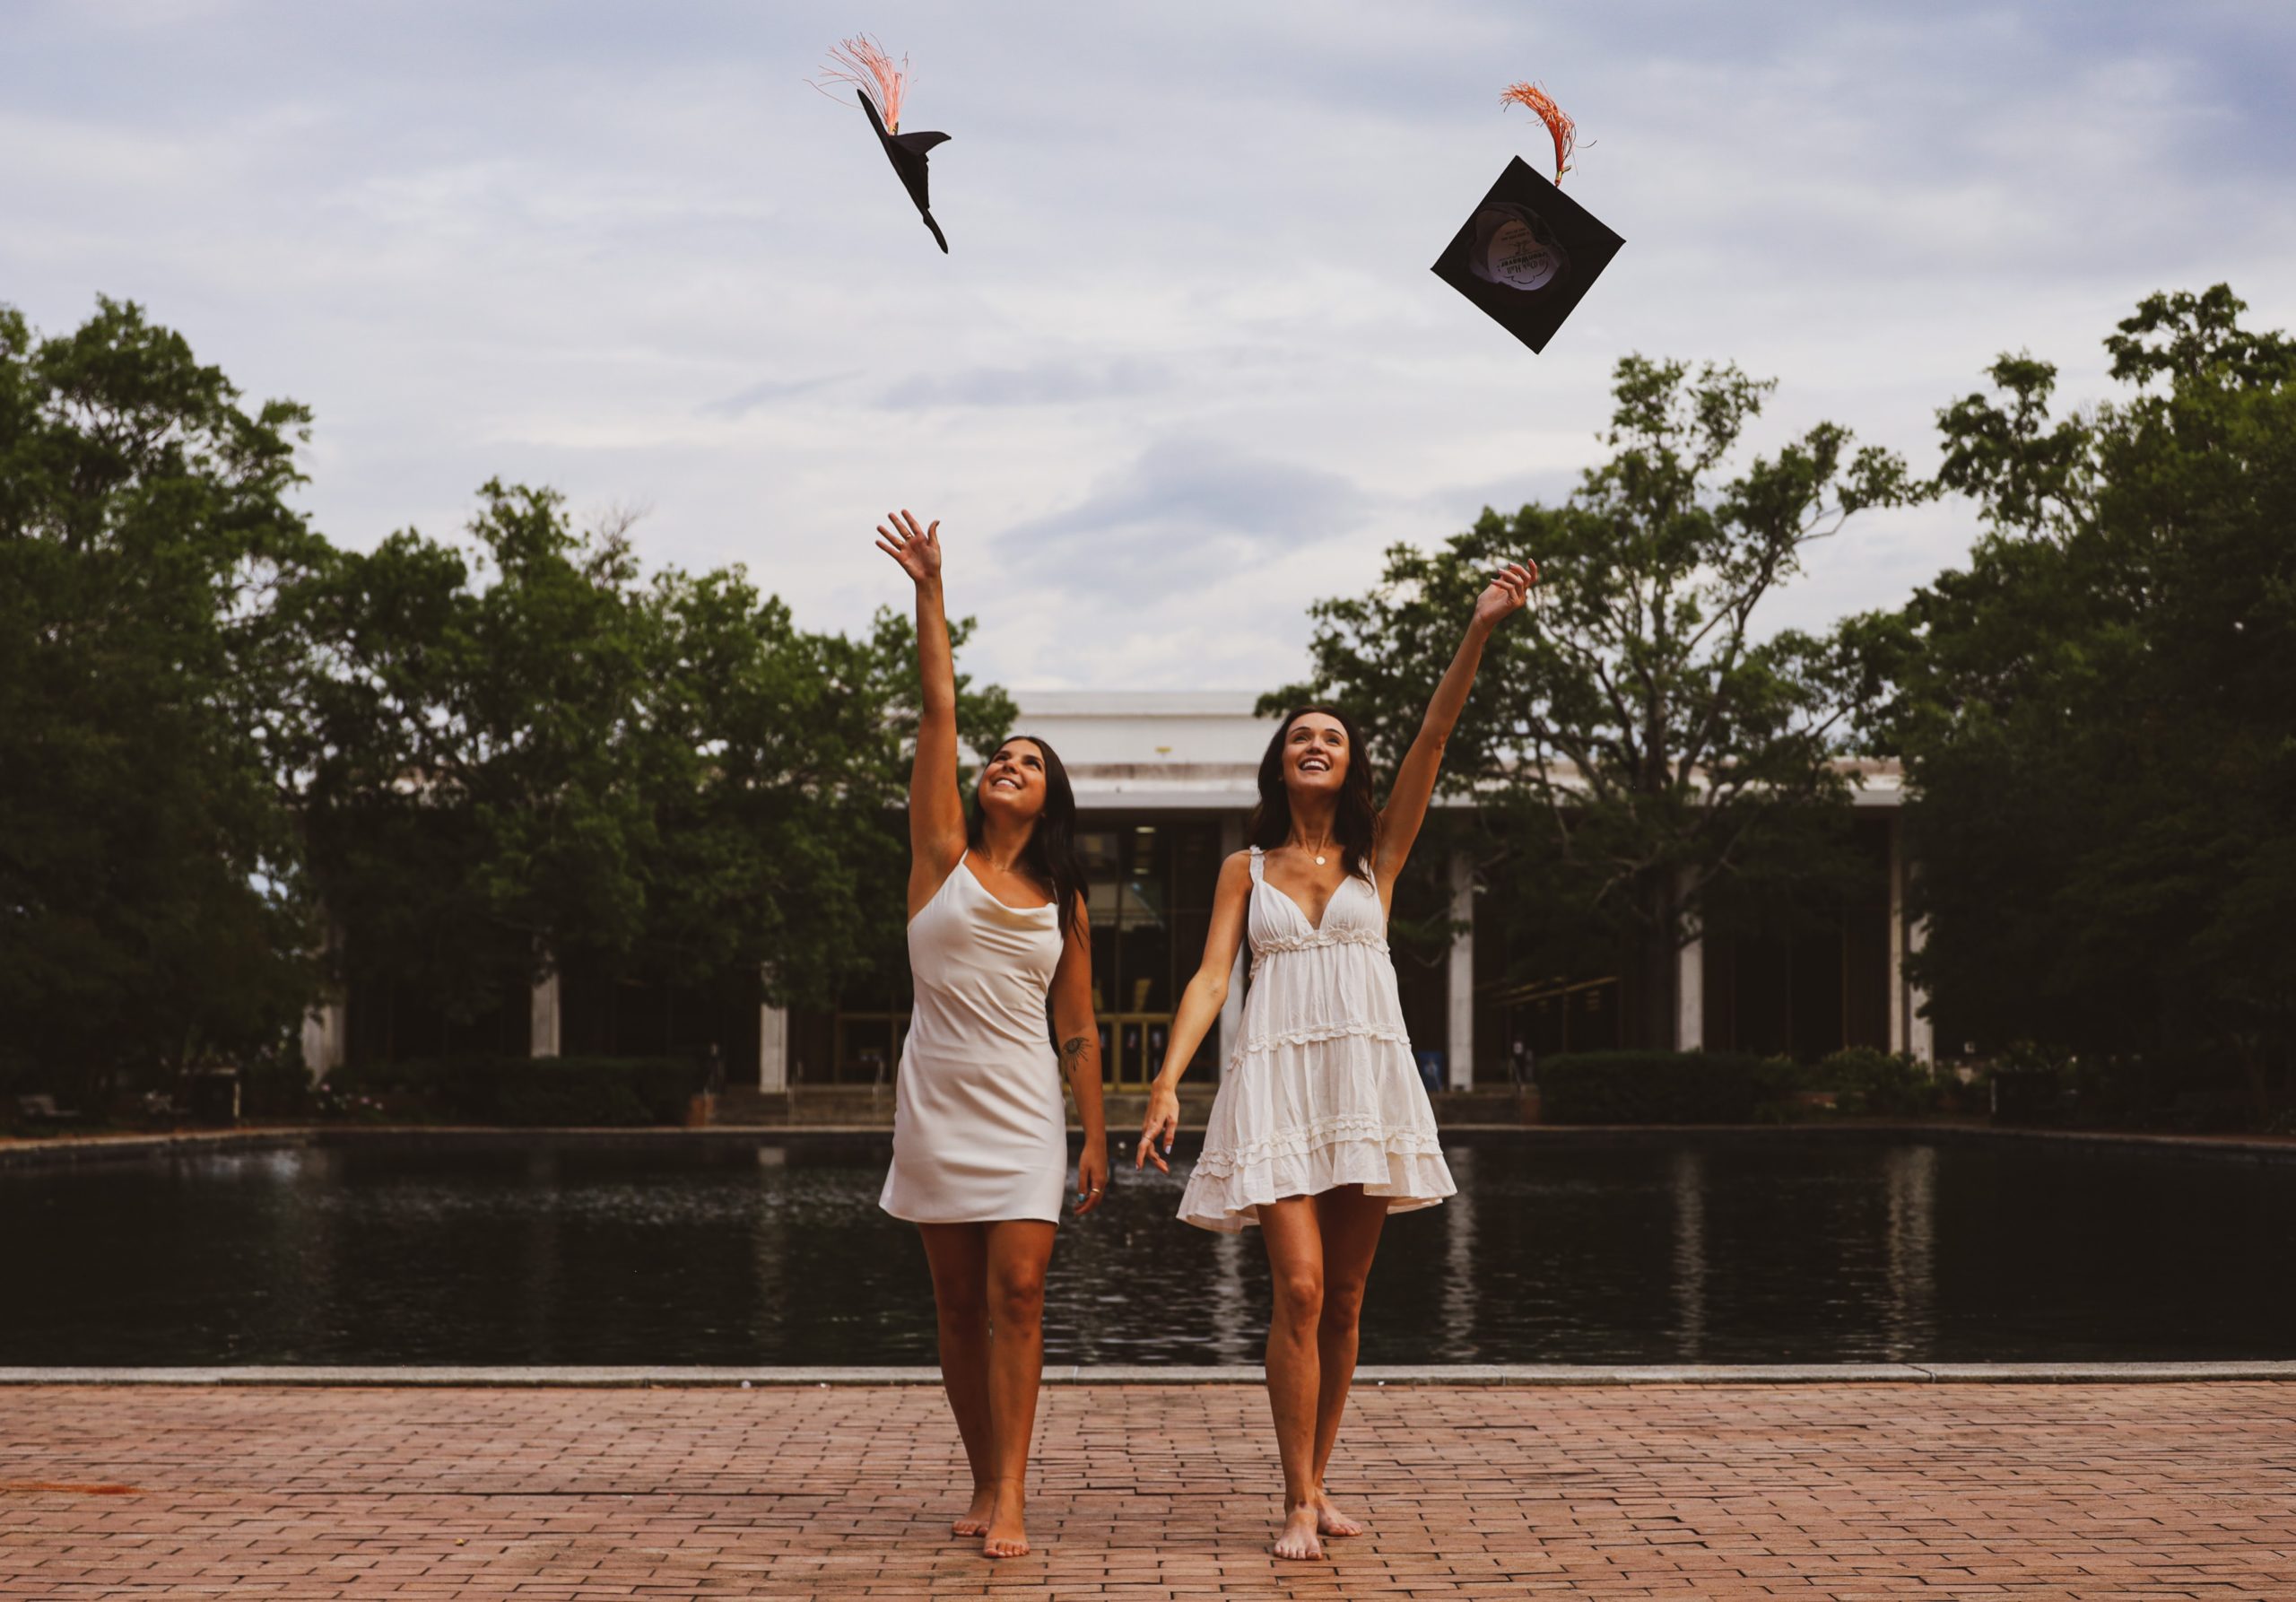 Dress to Impress: Finding the Perfect Graduation Attire for Every Woman